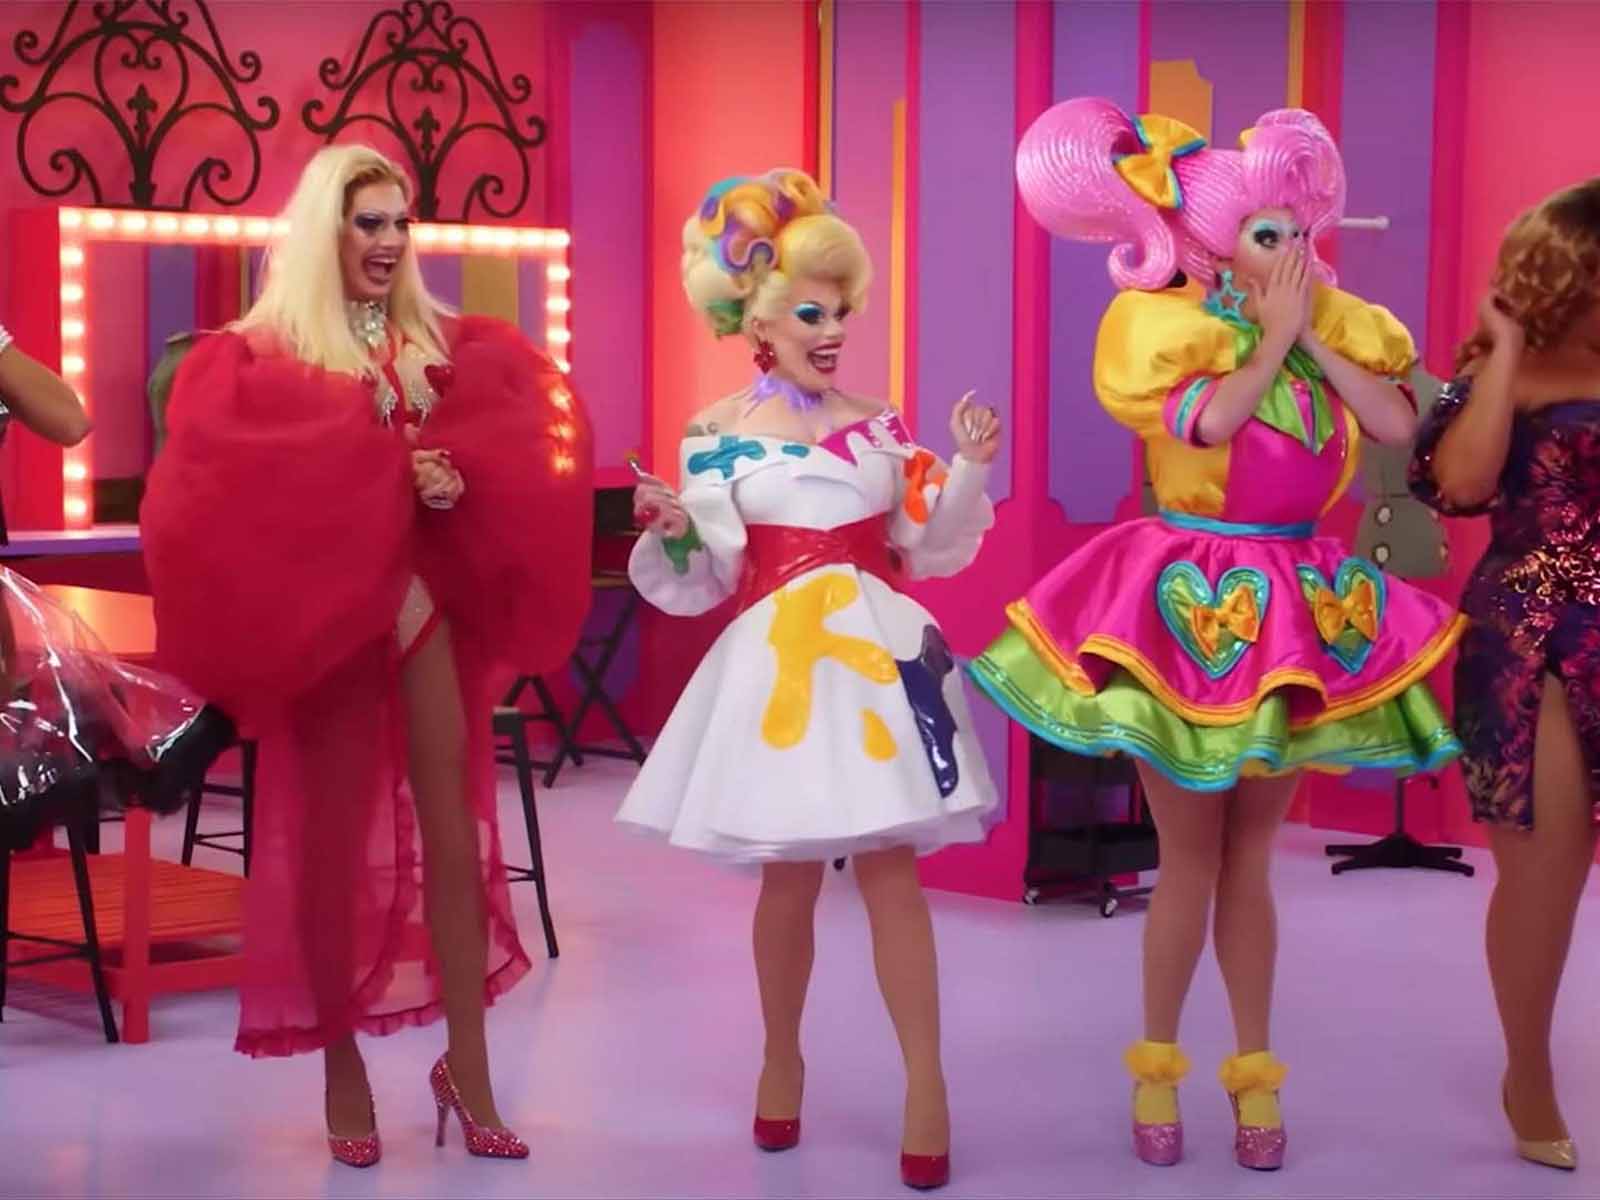 'Drag Race Down Under' is the latest spinoff of the iconic competition series. Here's why you need to make sure you're catching all the lewks and drama.